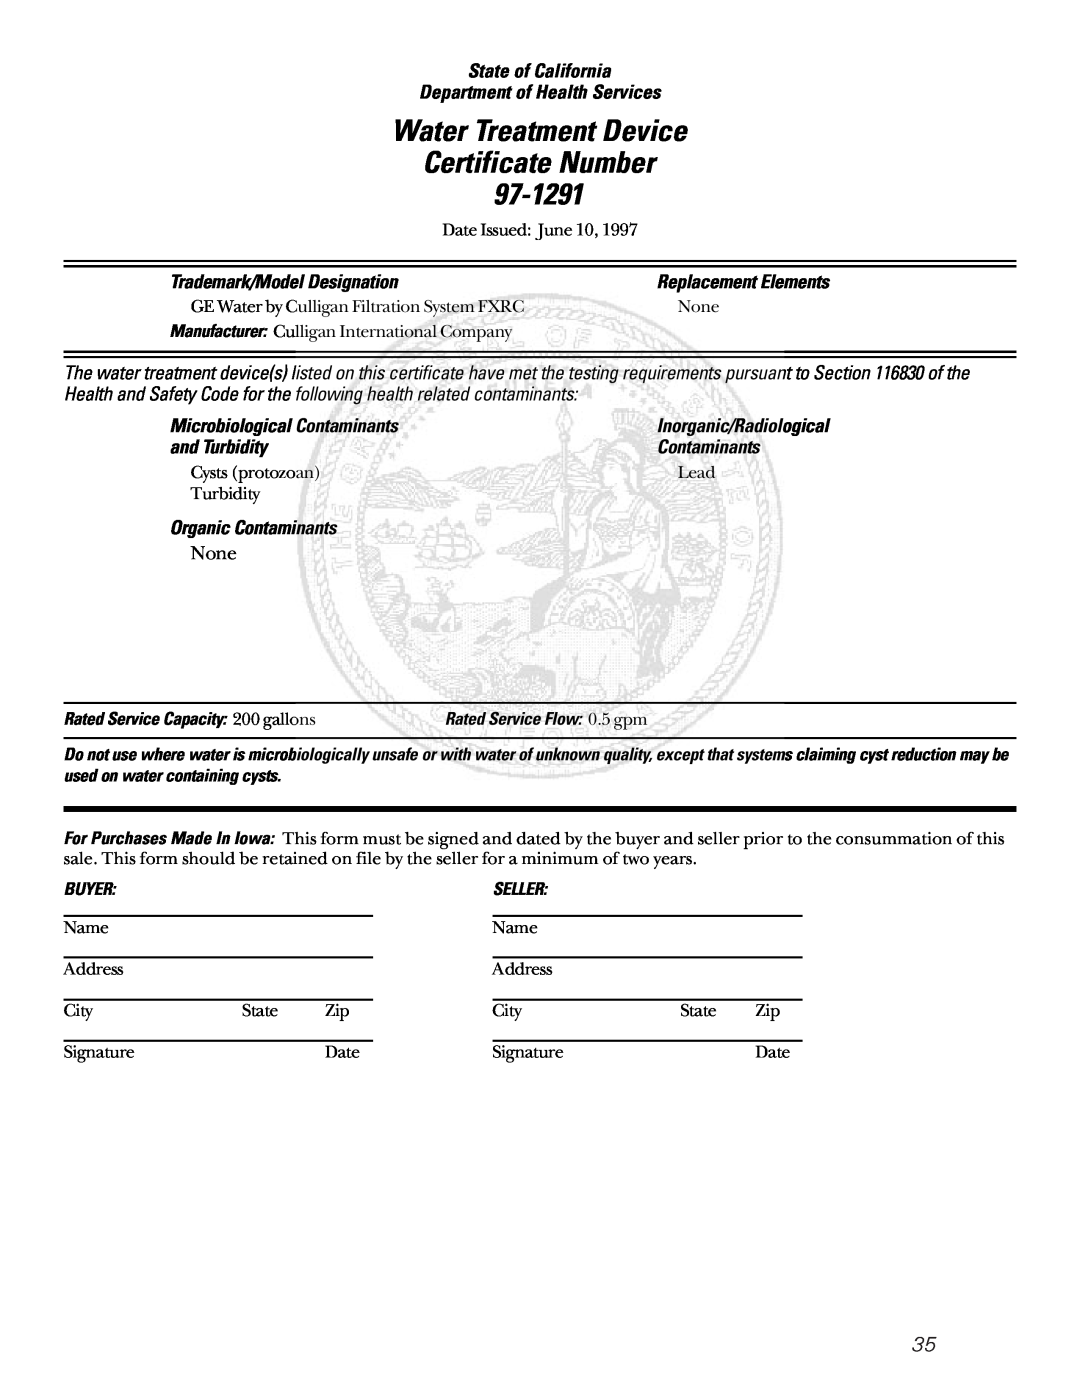 GE 24 CustomStyle Water Treatment Device Certificate Number 97-1291, State of California Department of Health Services 